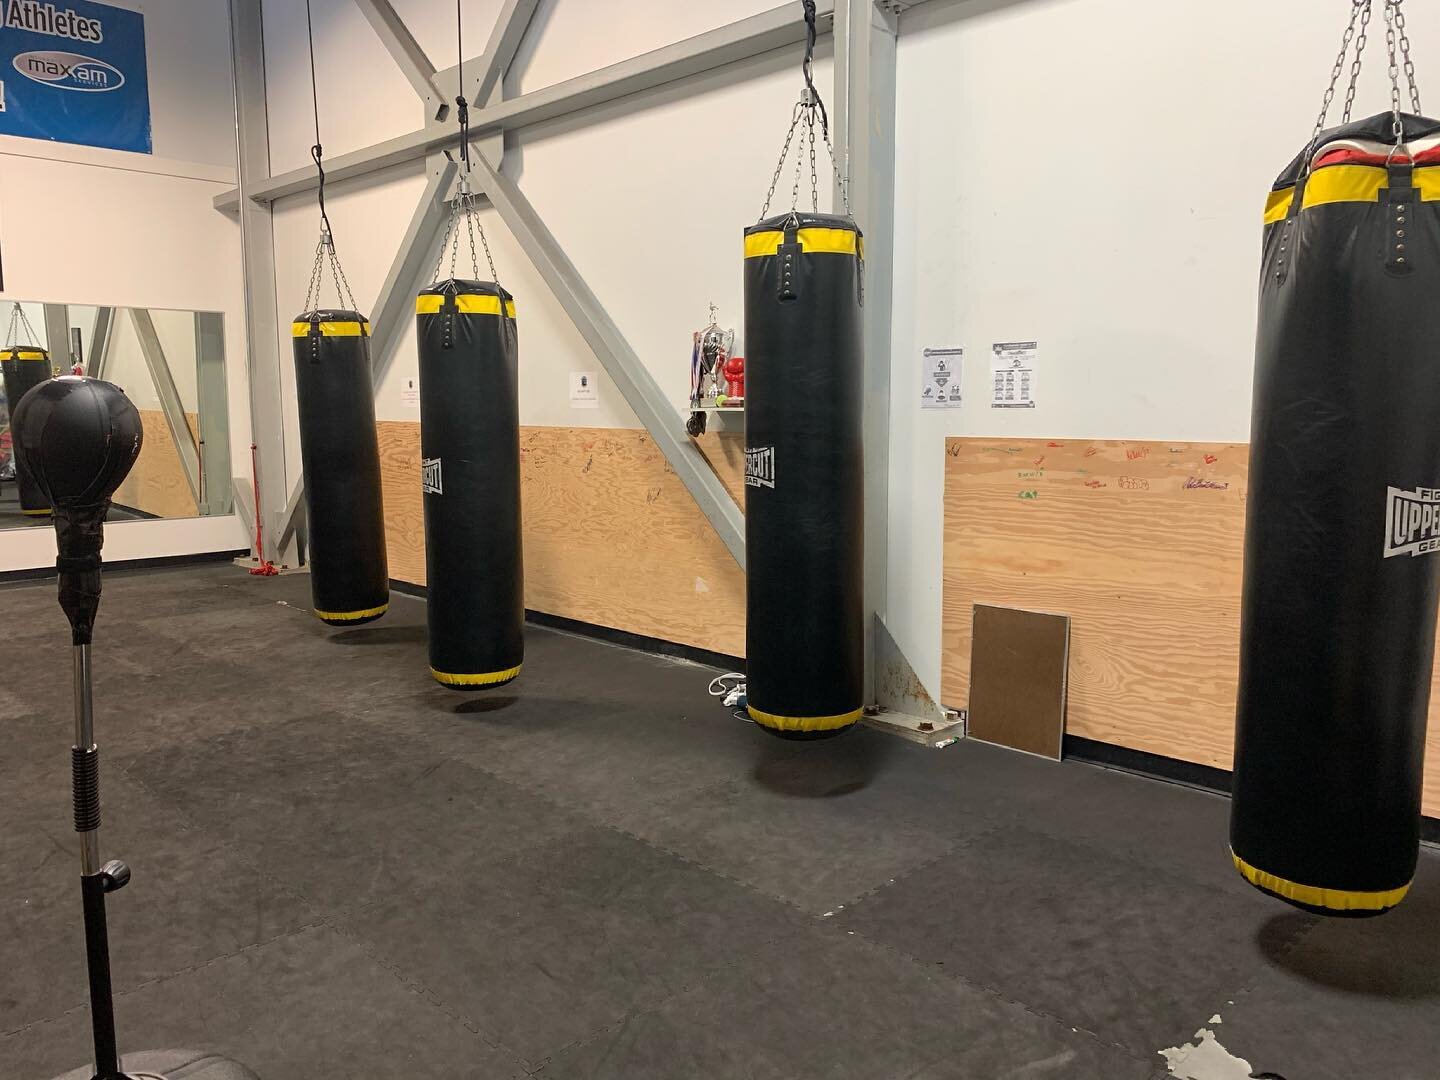 ❗️Hey guys❗️

Starting Monday (05/31/2021) we are going to be back in the gym for technical training! 

Everyone will have to wear a mask and classes will have a limited capacity. Please go to our website to book your classes! 
🥊😎💪
Questions or co